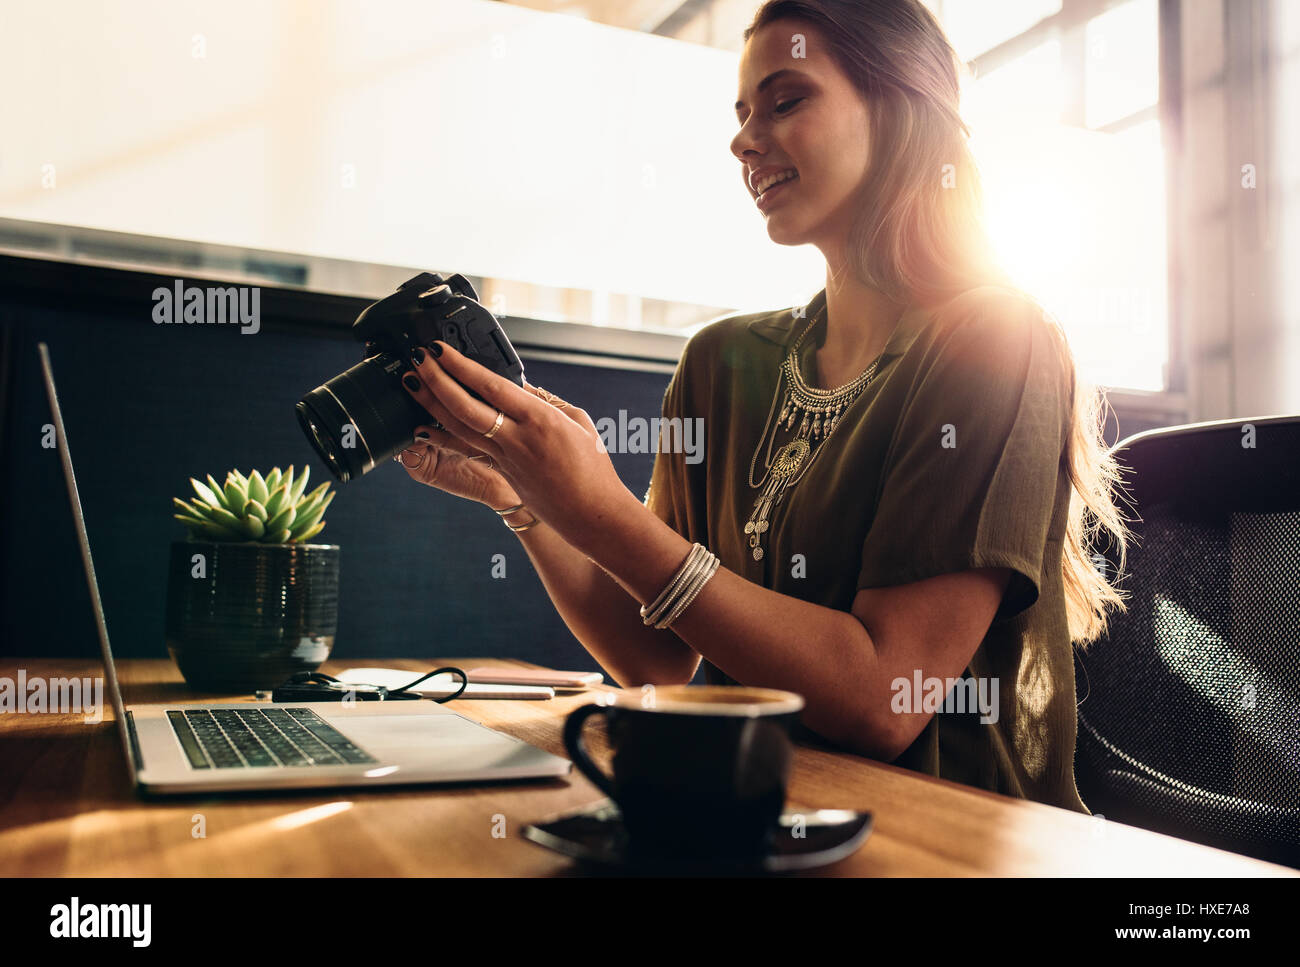 Young woman looking at camera while working on laptop. Young photographer with her camera and laptop on her desk. Stock Photo